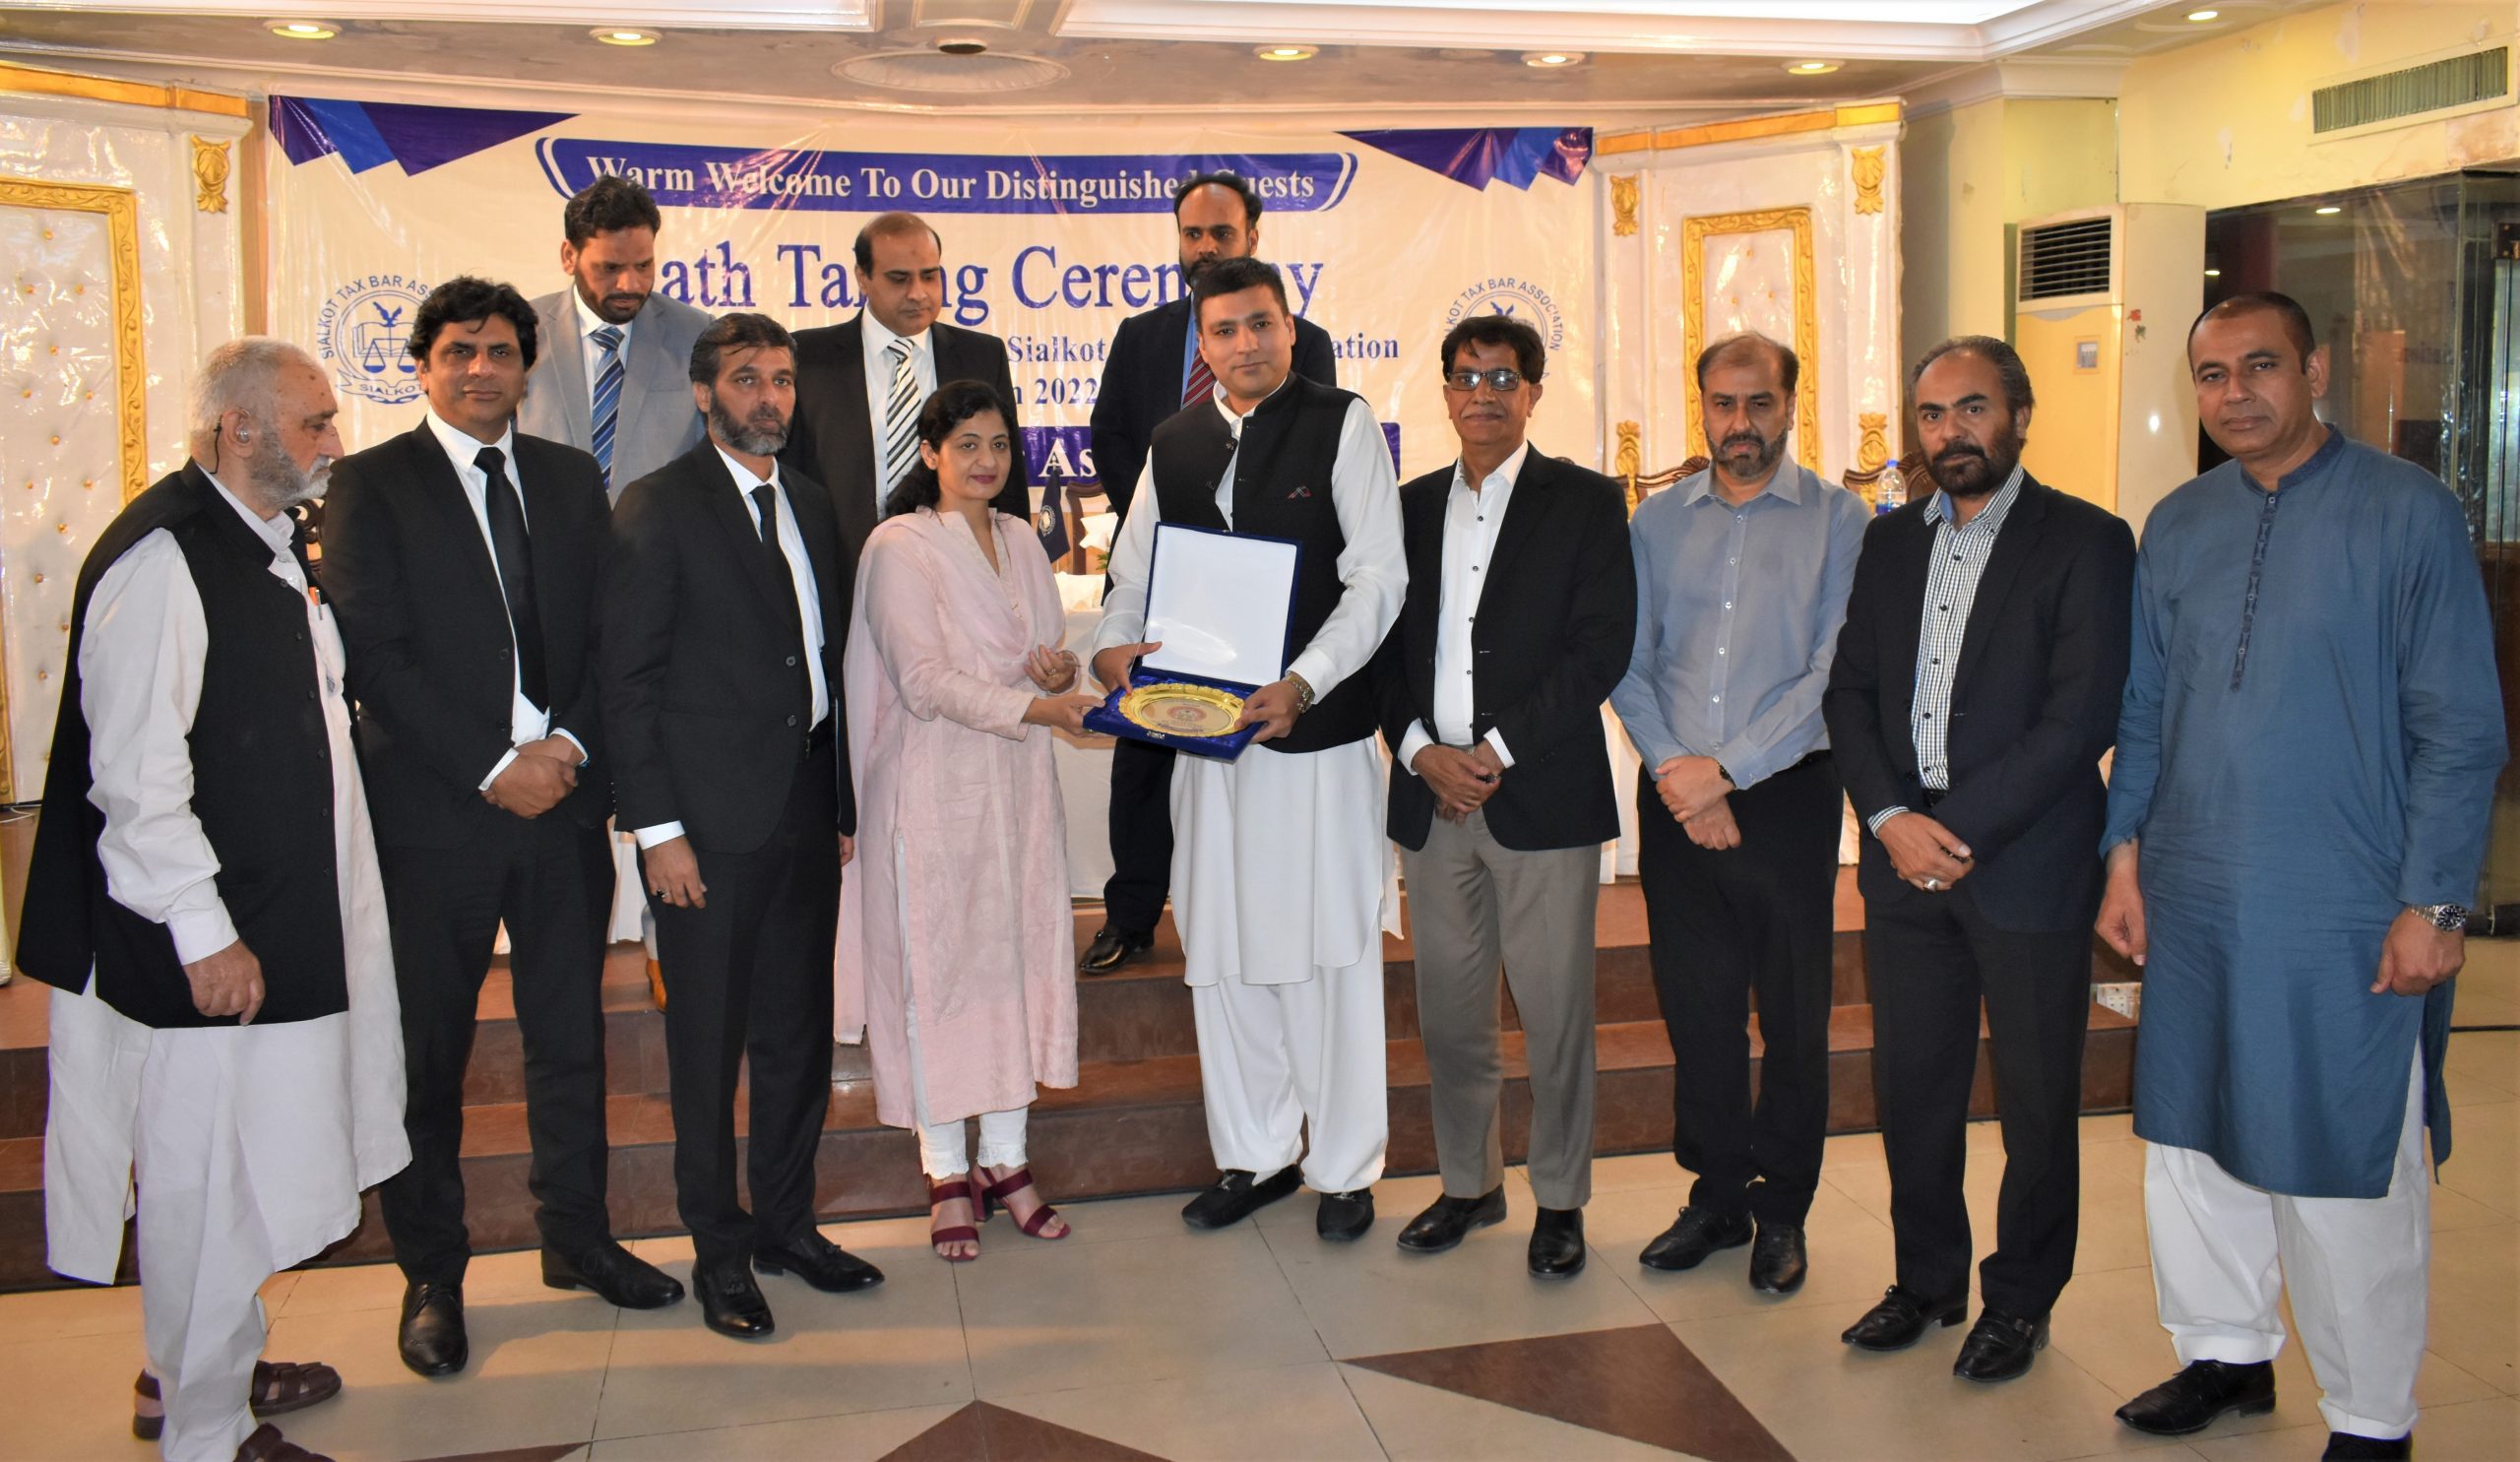 Sheikh Zohaib Rafique Sethi, Senior Vice President, Sialkot Chamber of Commerce & Industry as Guest of Honor attended the Oath Taking Ceremony hosted by Sialkot Tax Bar Association at Taj Hotel on May 10, 2022.